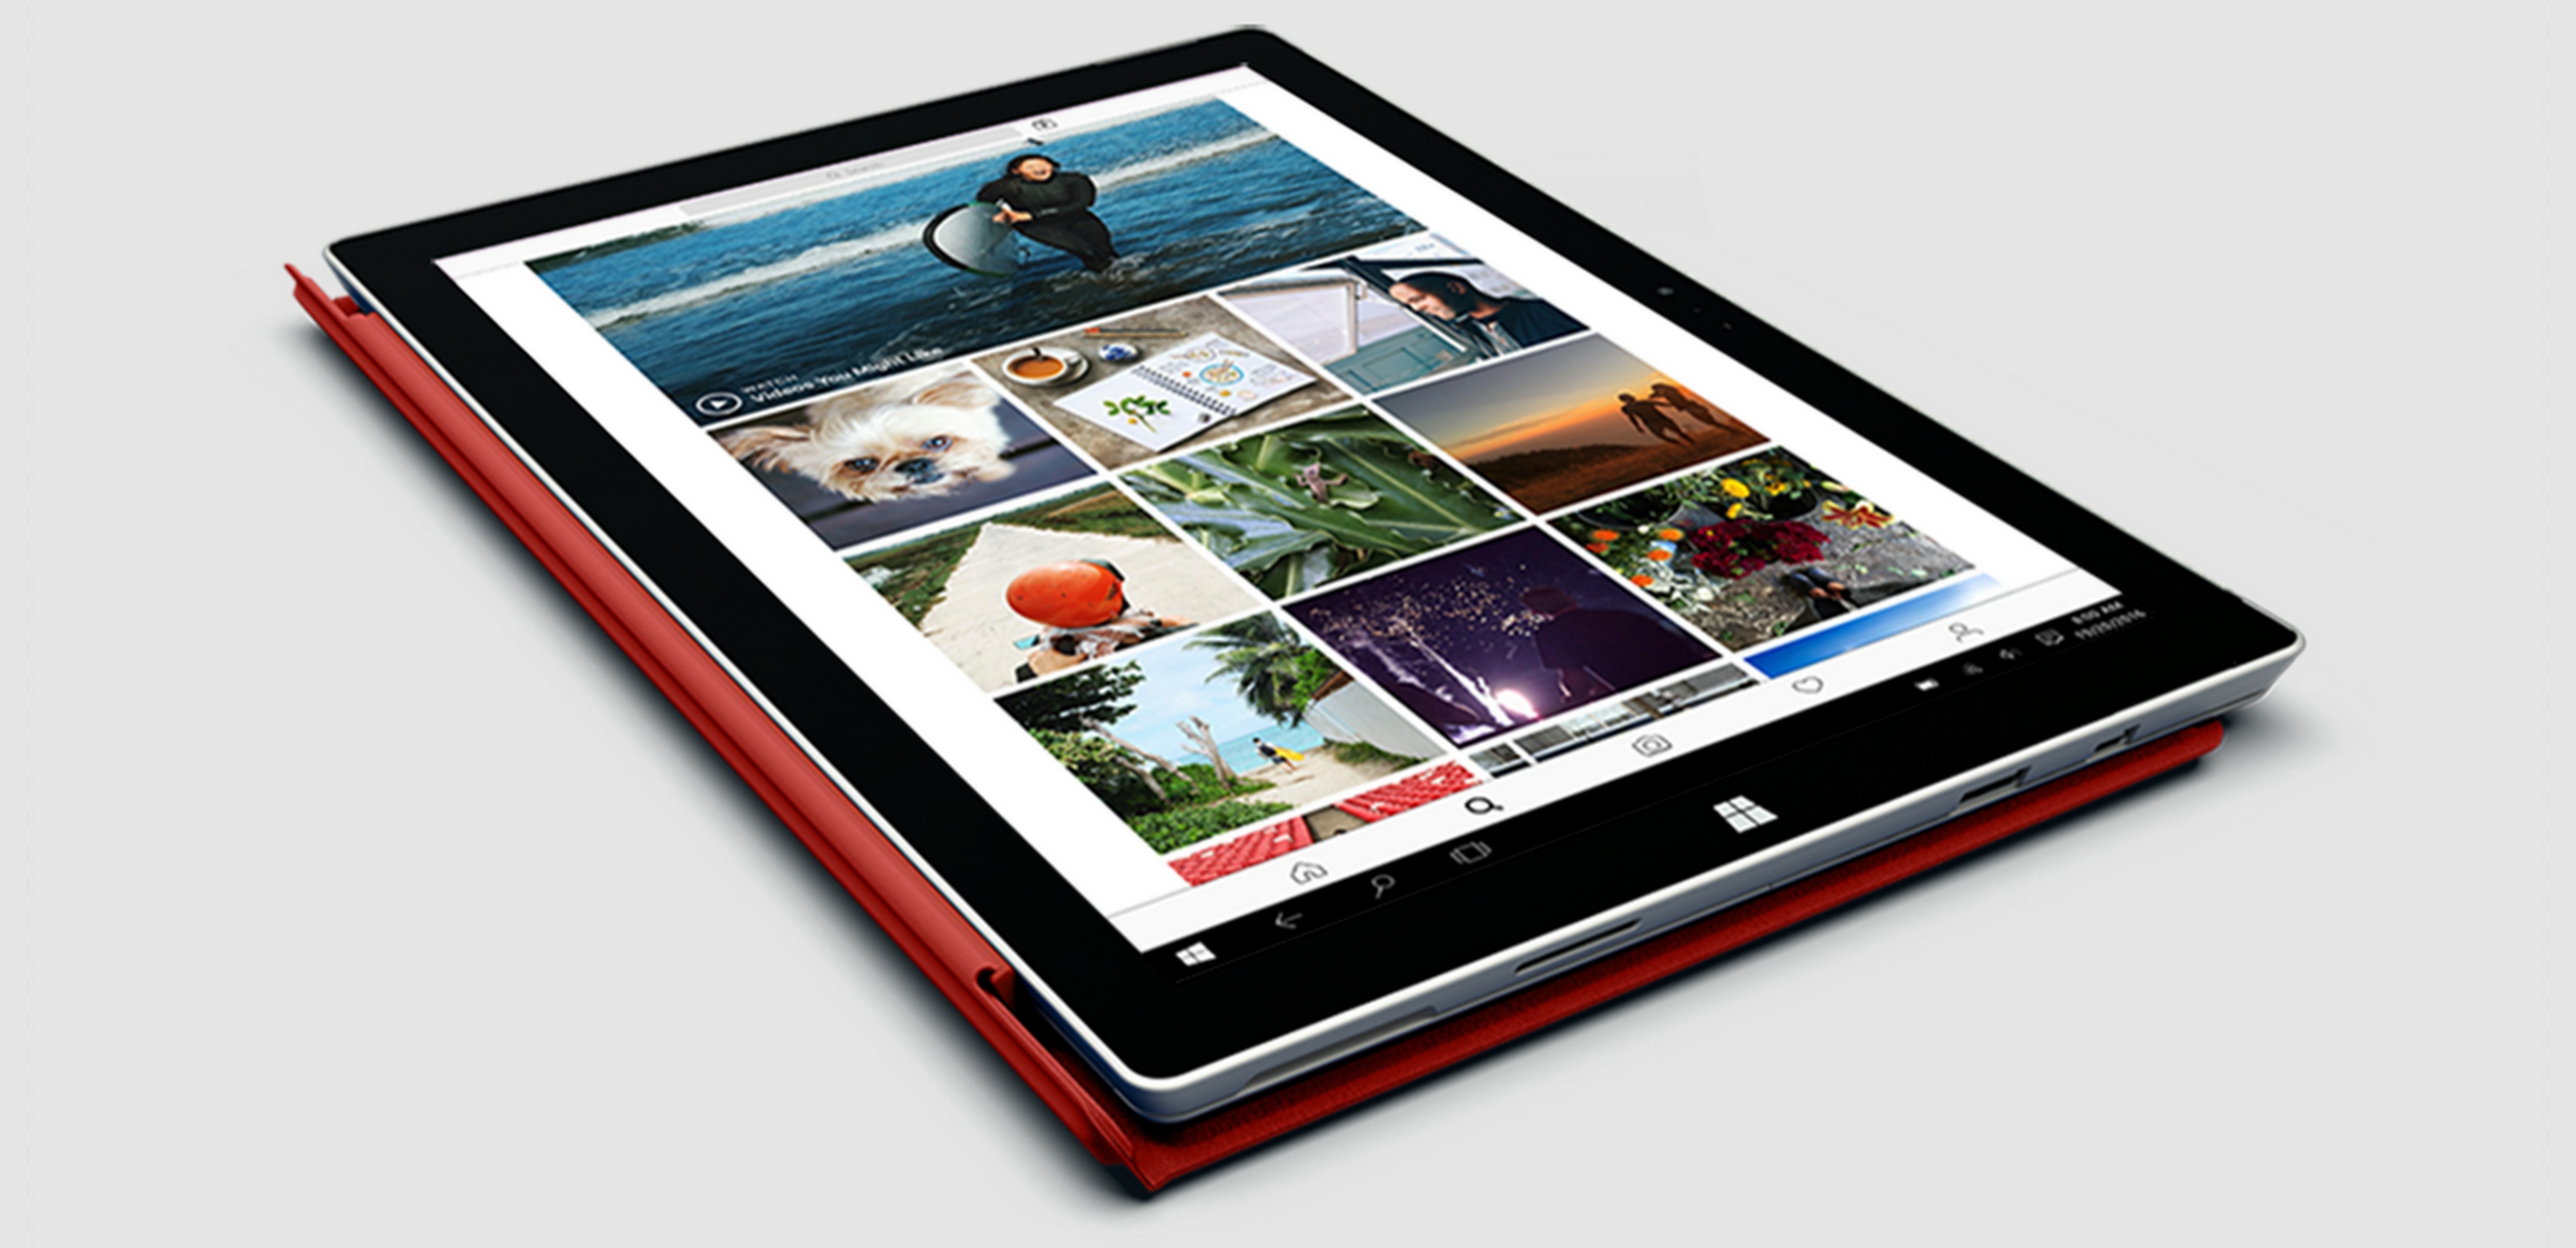 Instagram for Windows 10 PCs and tablets